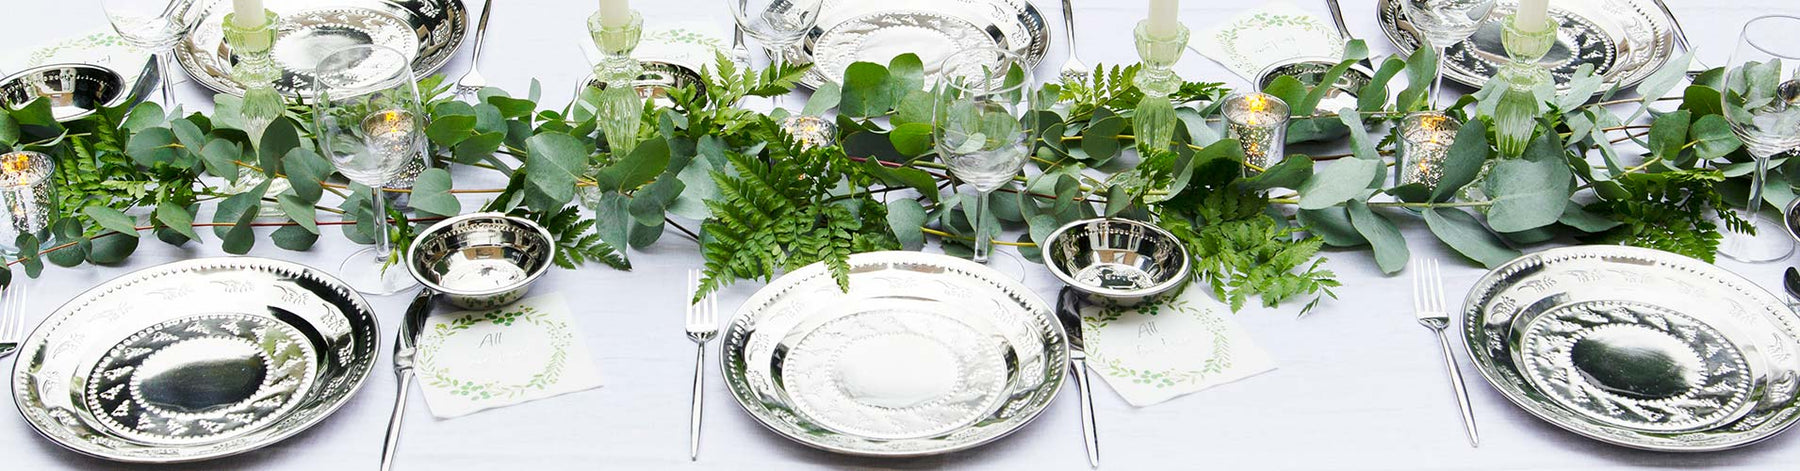 Wedding Collection Tableware and Decorations - Talking Tables Wholesale EU